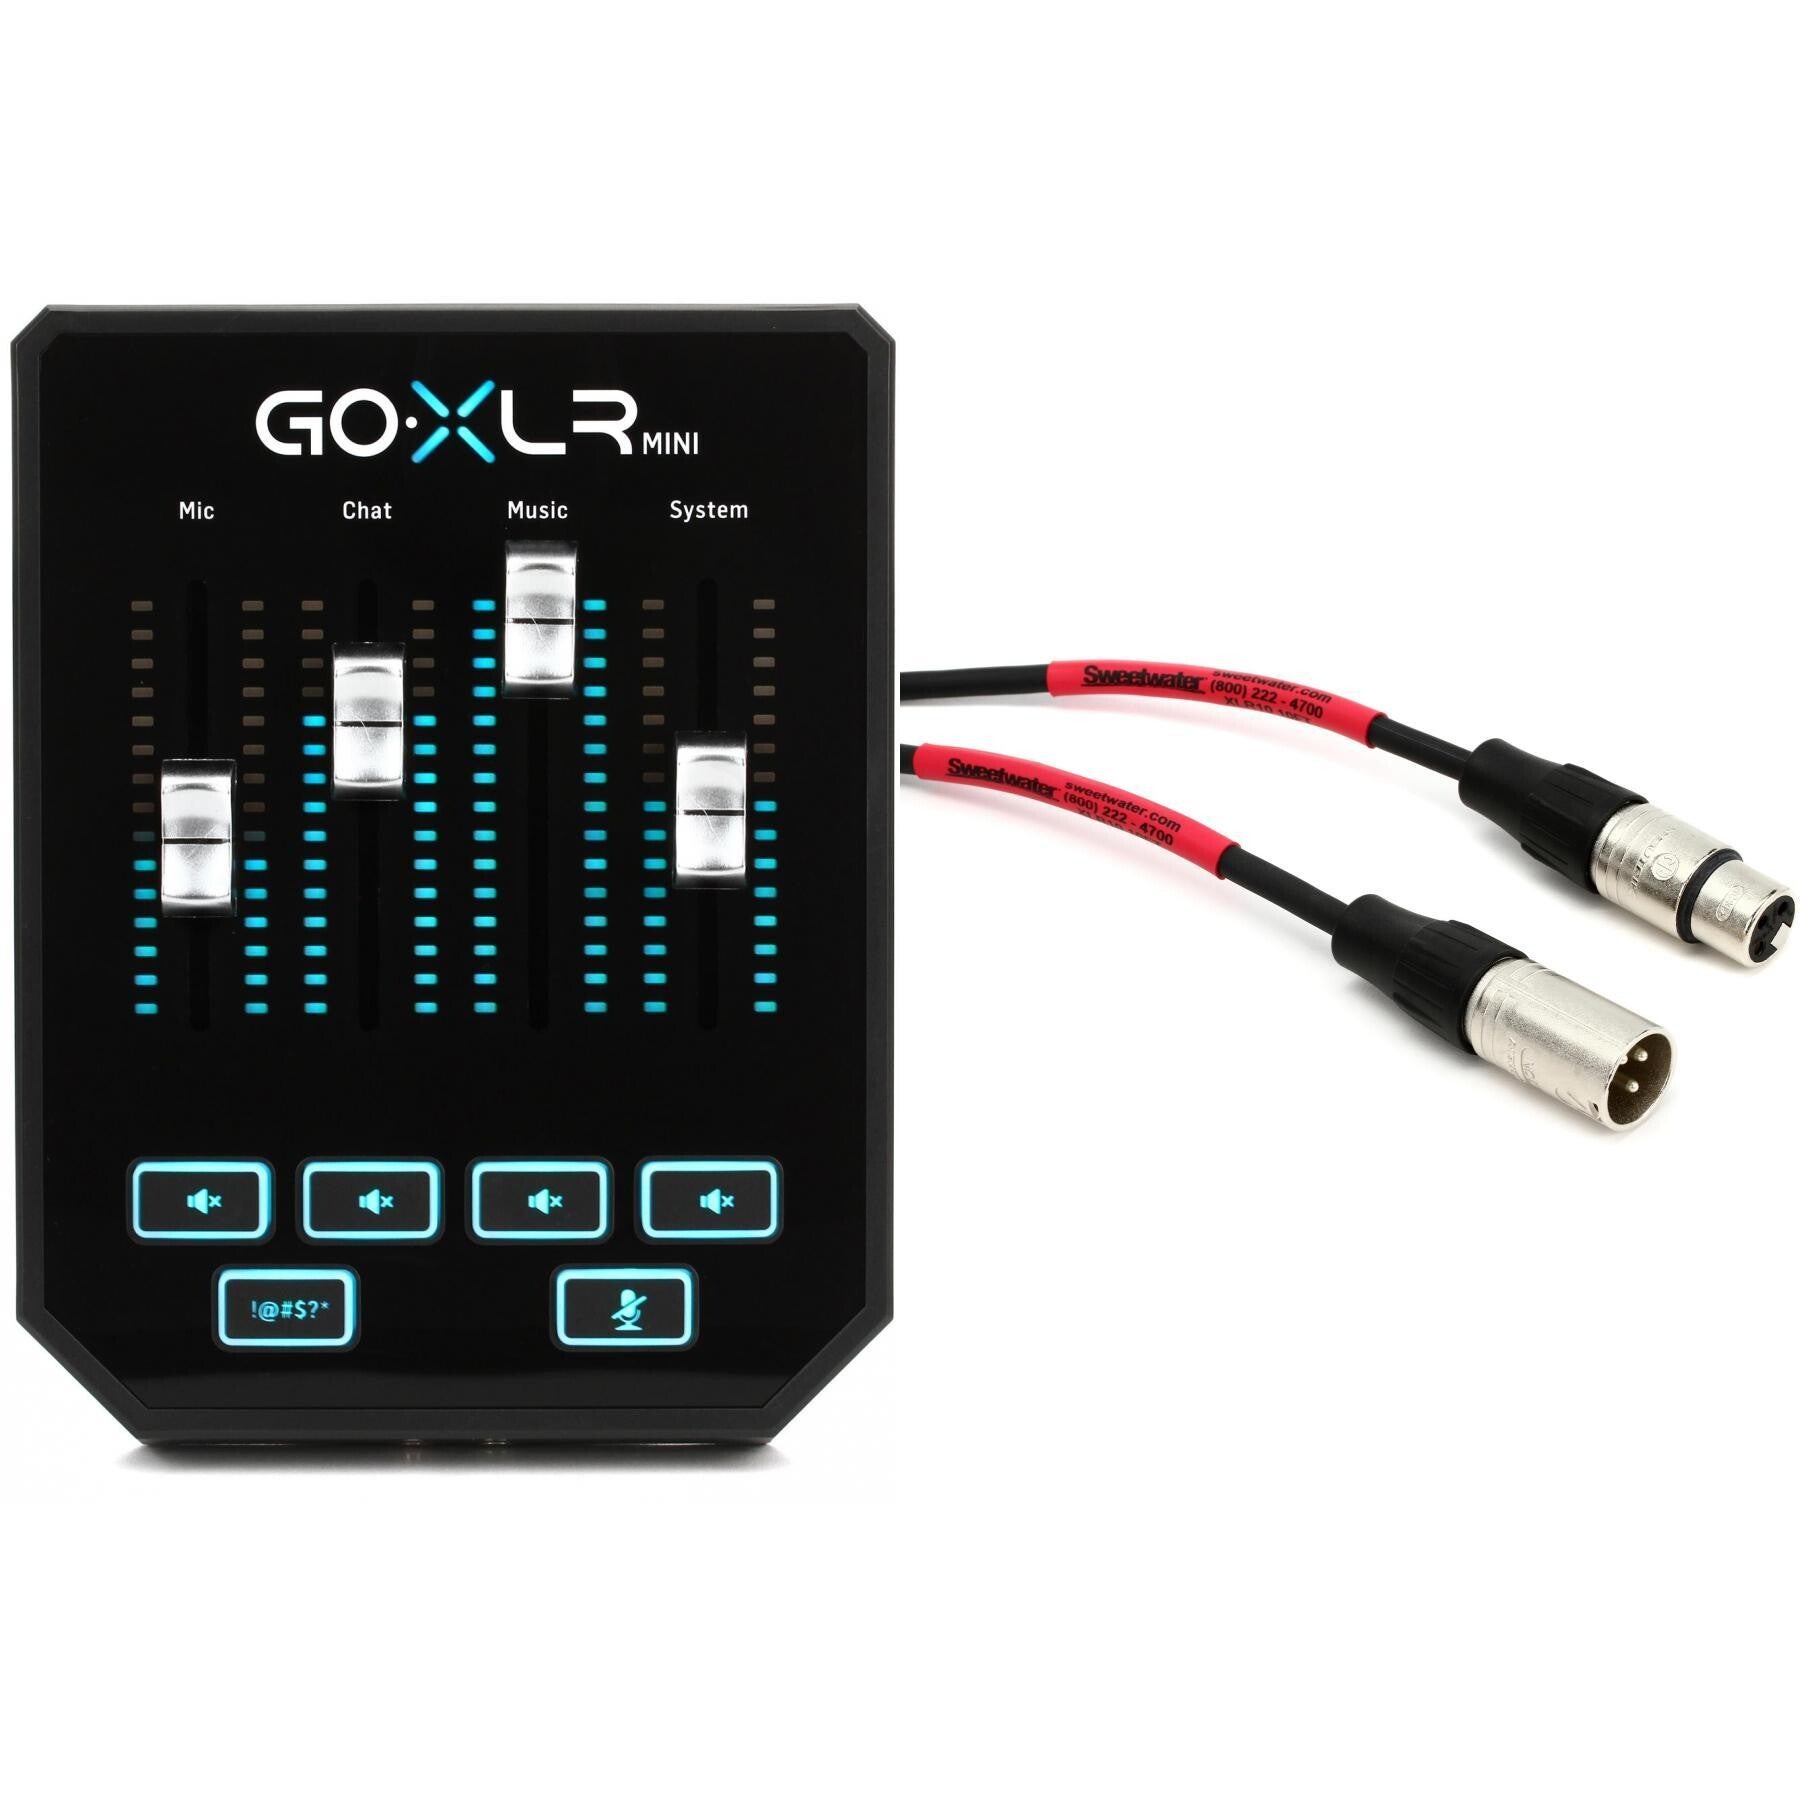 How to use a USB Mic with GoXLR Mini - Full Tutorial 